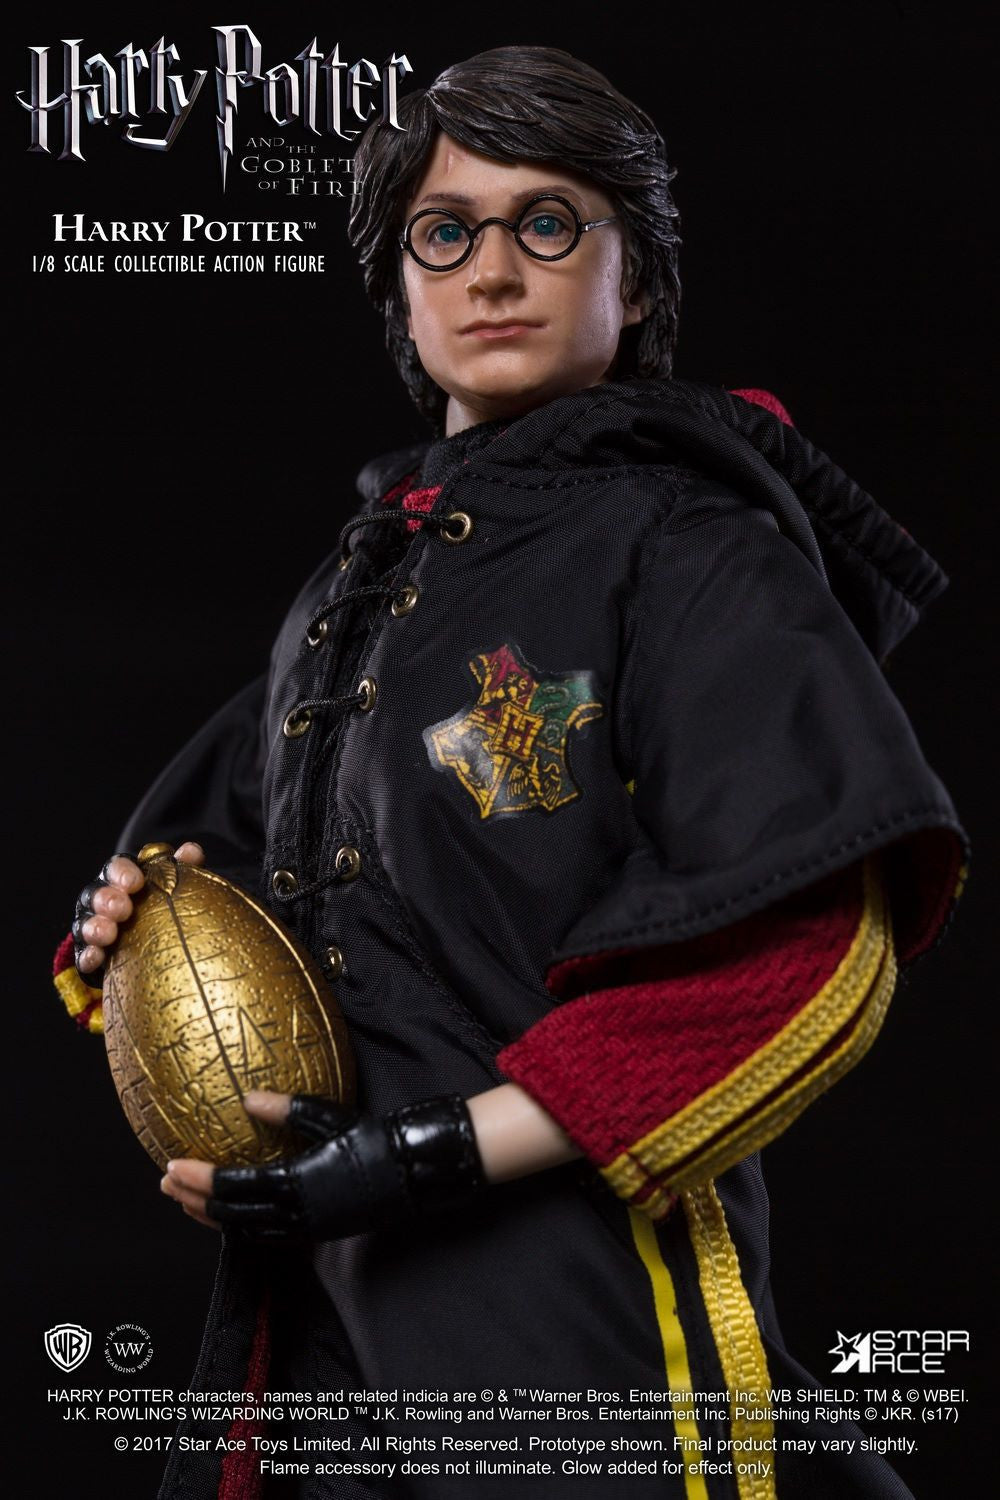 Star Ace Toys - SA8001B - Harry Potter and the Goblet of Fire - Harry Potter (Triwizard Tournament Battle Version) - Marvelous Toys